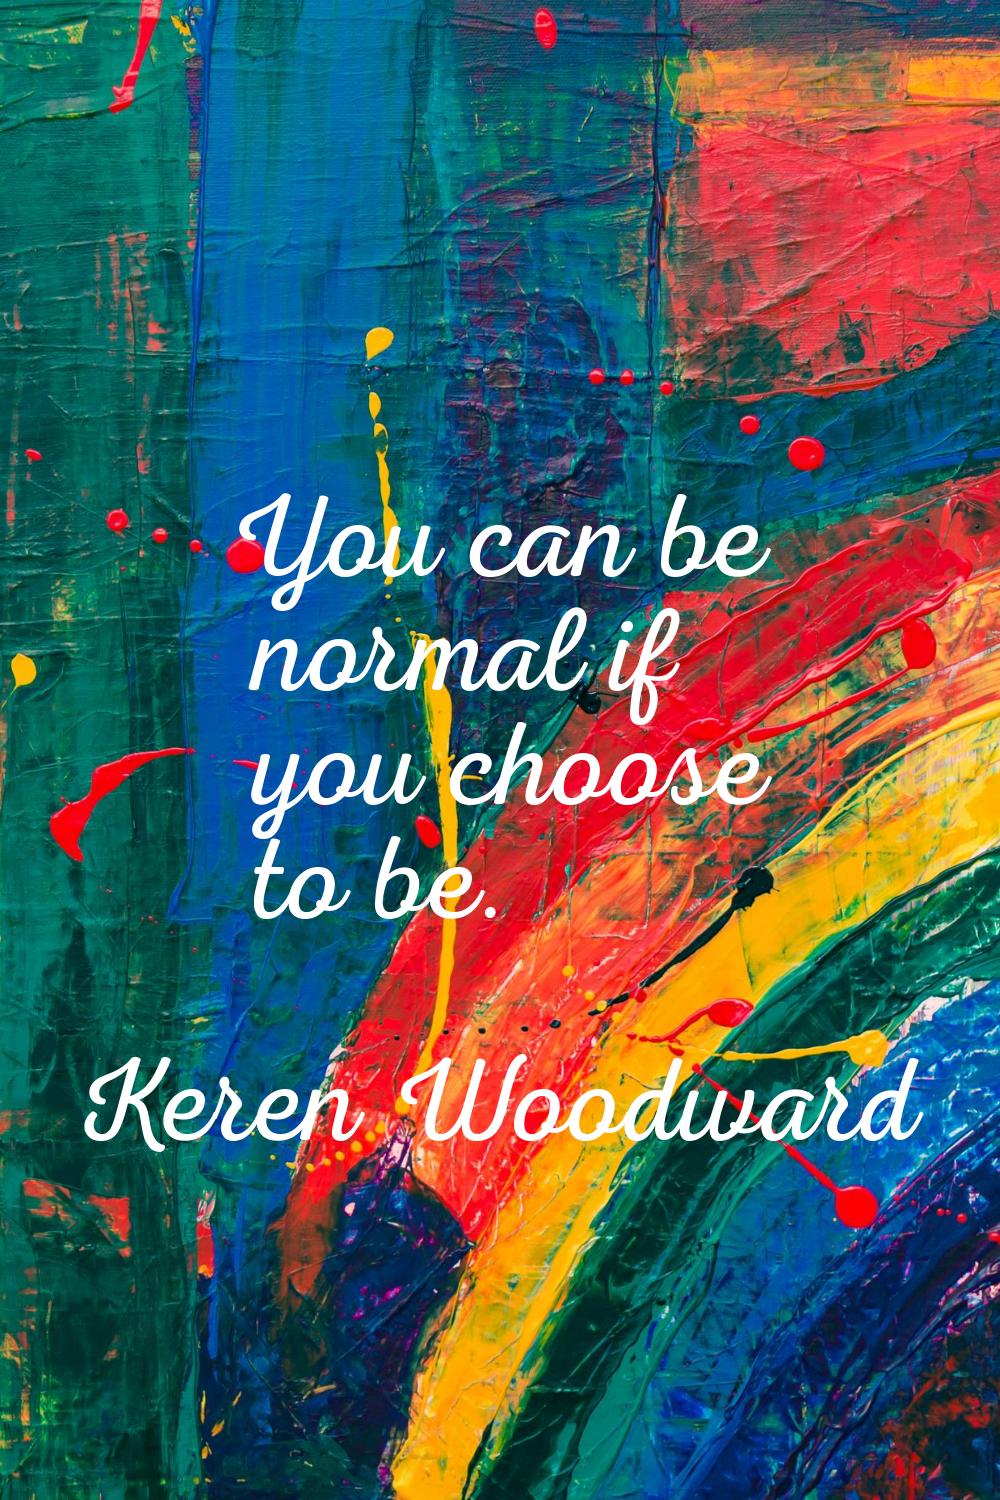 You can be normal if you choose to be.